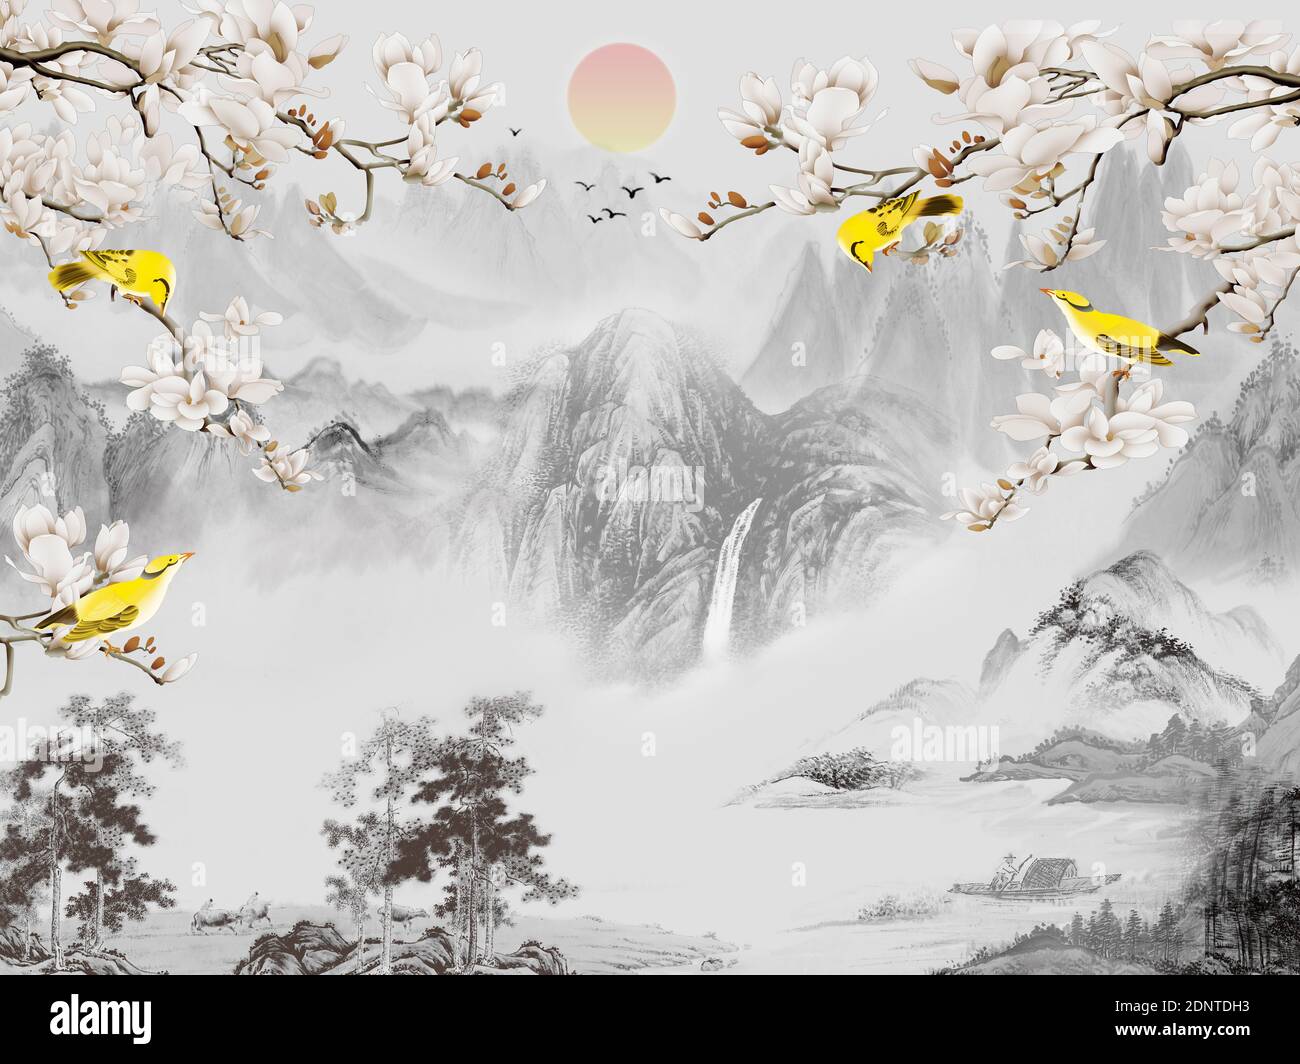 Landscape illustration, gray mountains, trees, sunrise in the fog, yellow birds sit on the branches of a tree that blooms with white flowers Stock Photo